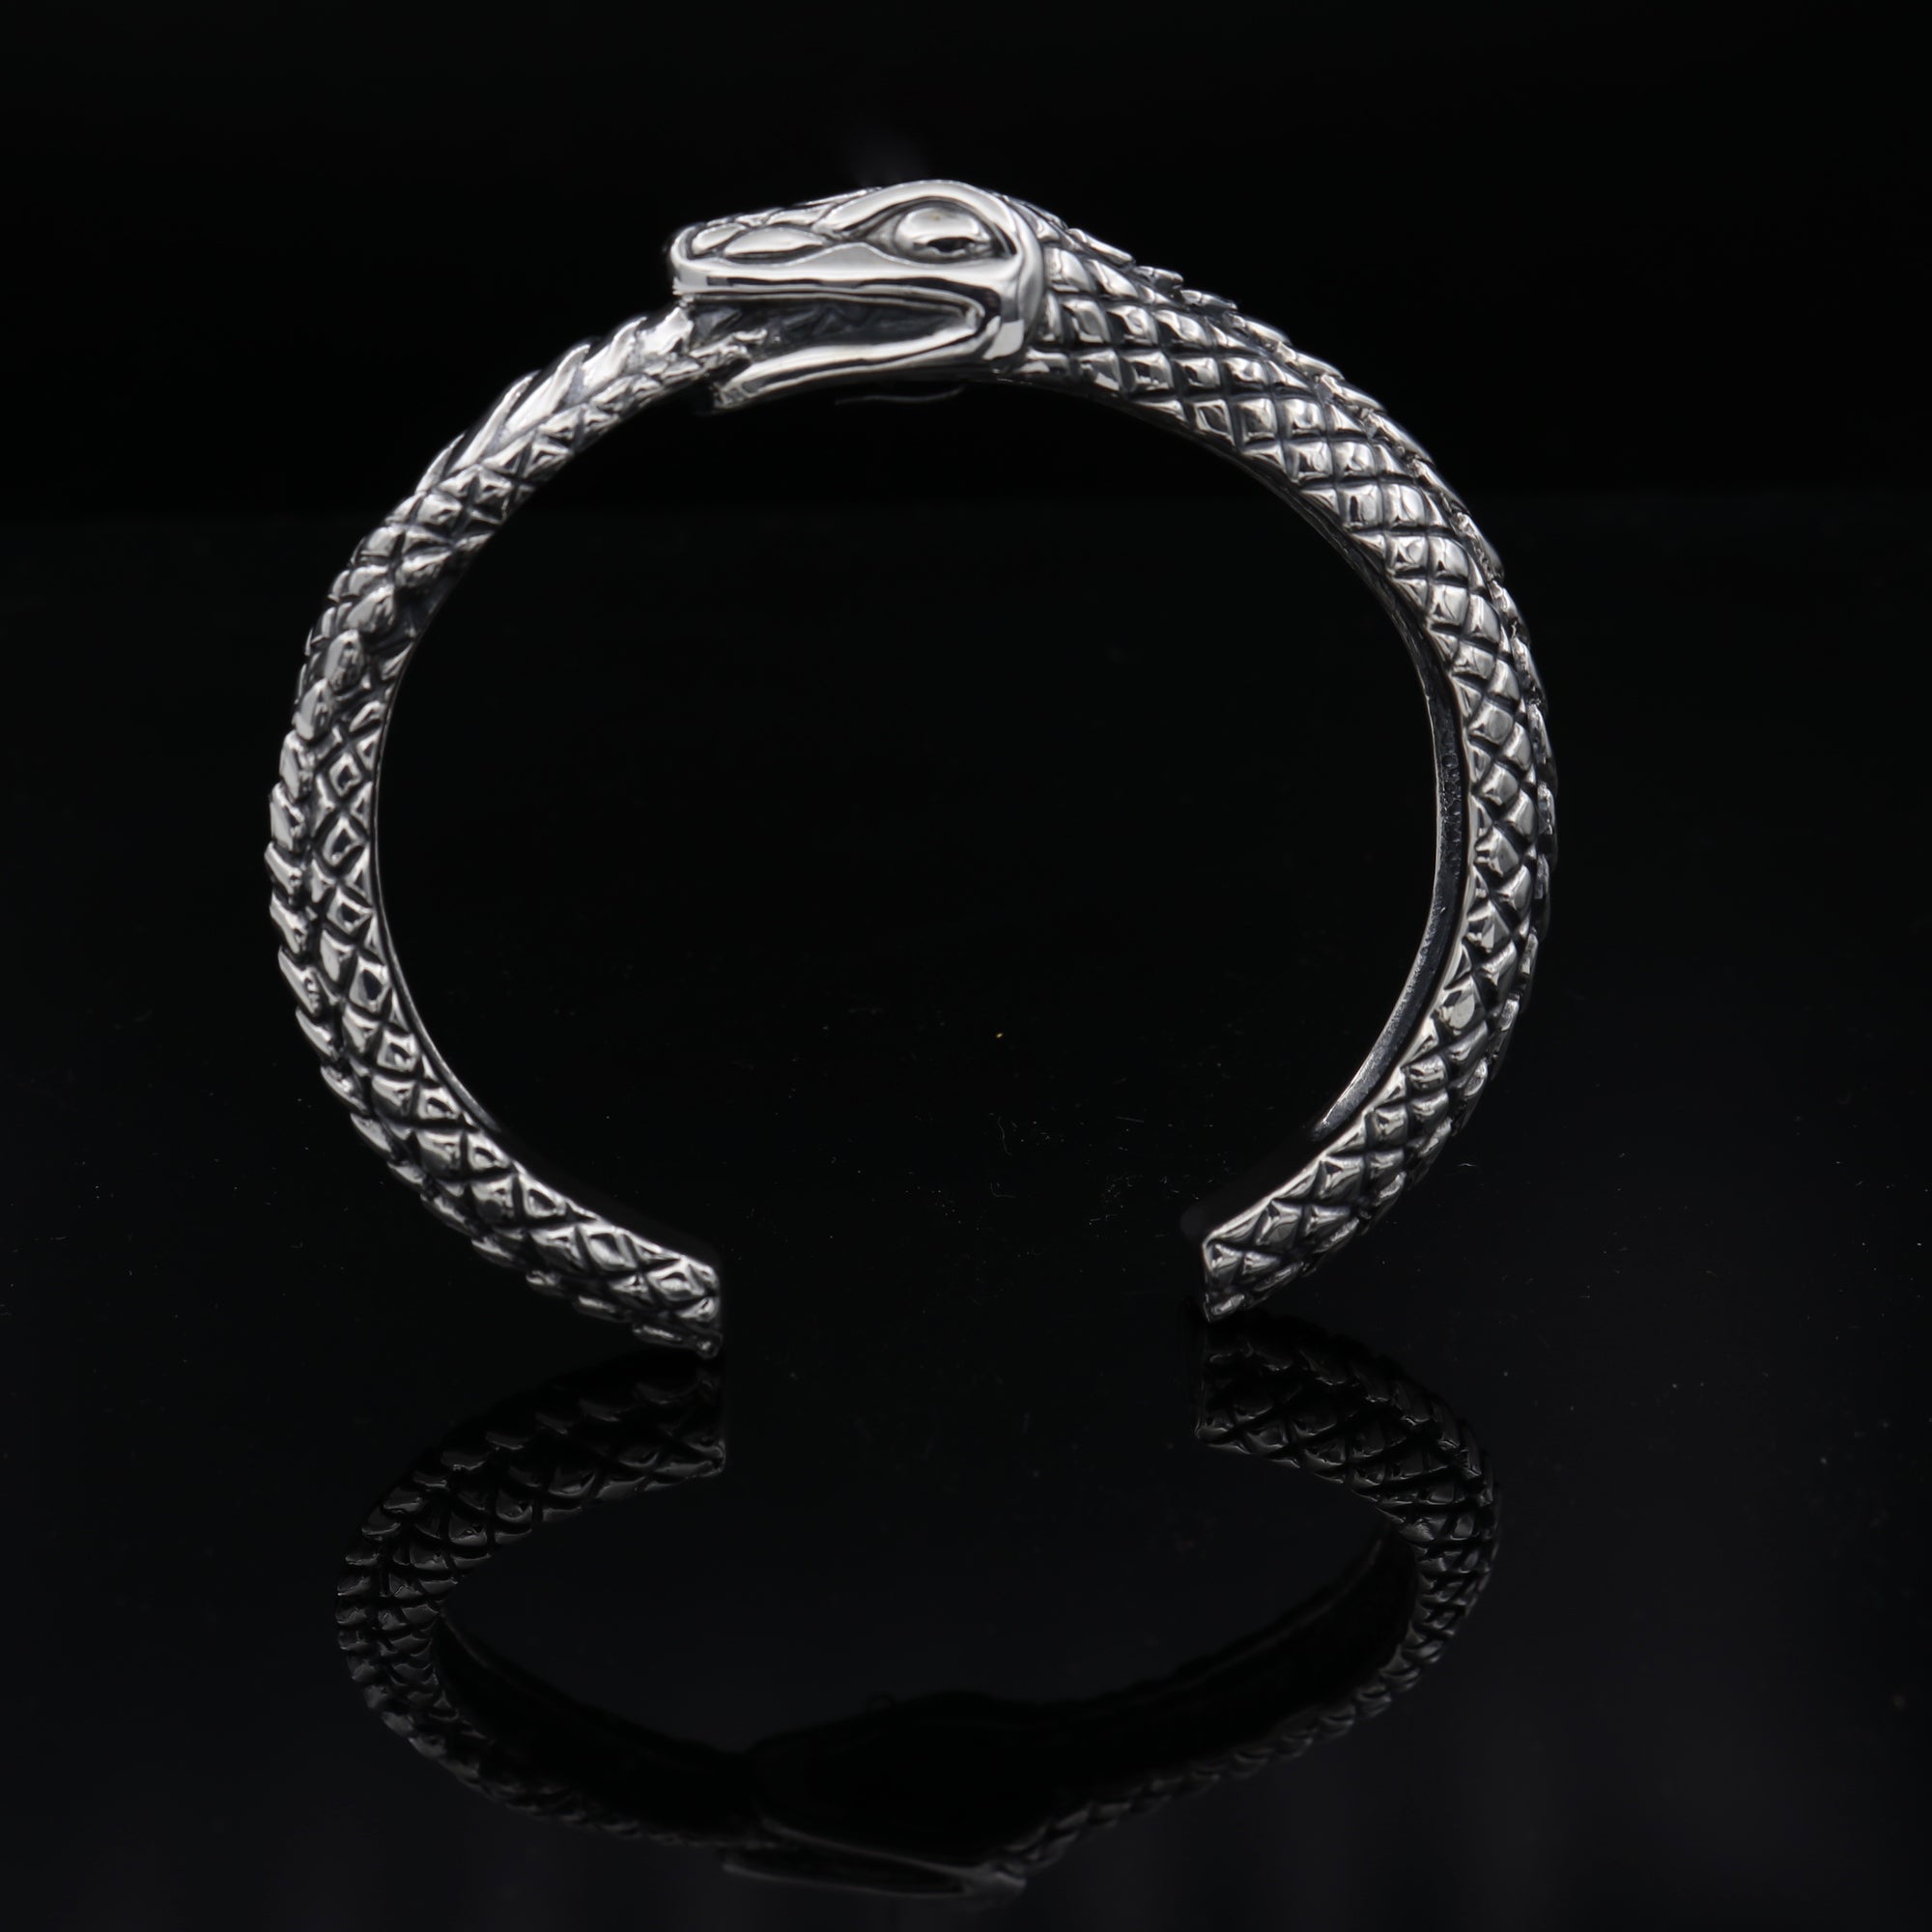 Ouroboros Cuff in Sterling Silver. The Ouroboros Snake deign is symbolic of the cycles of death and rebirth. Available in 3 wrist sizes.